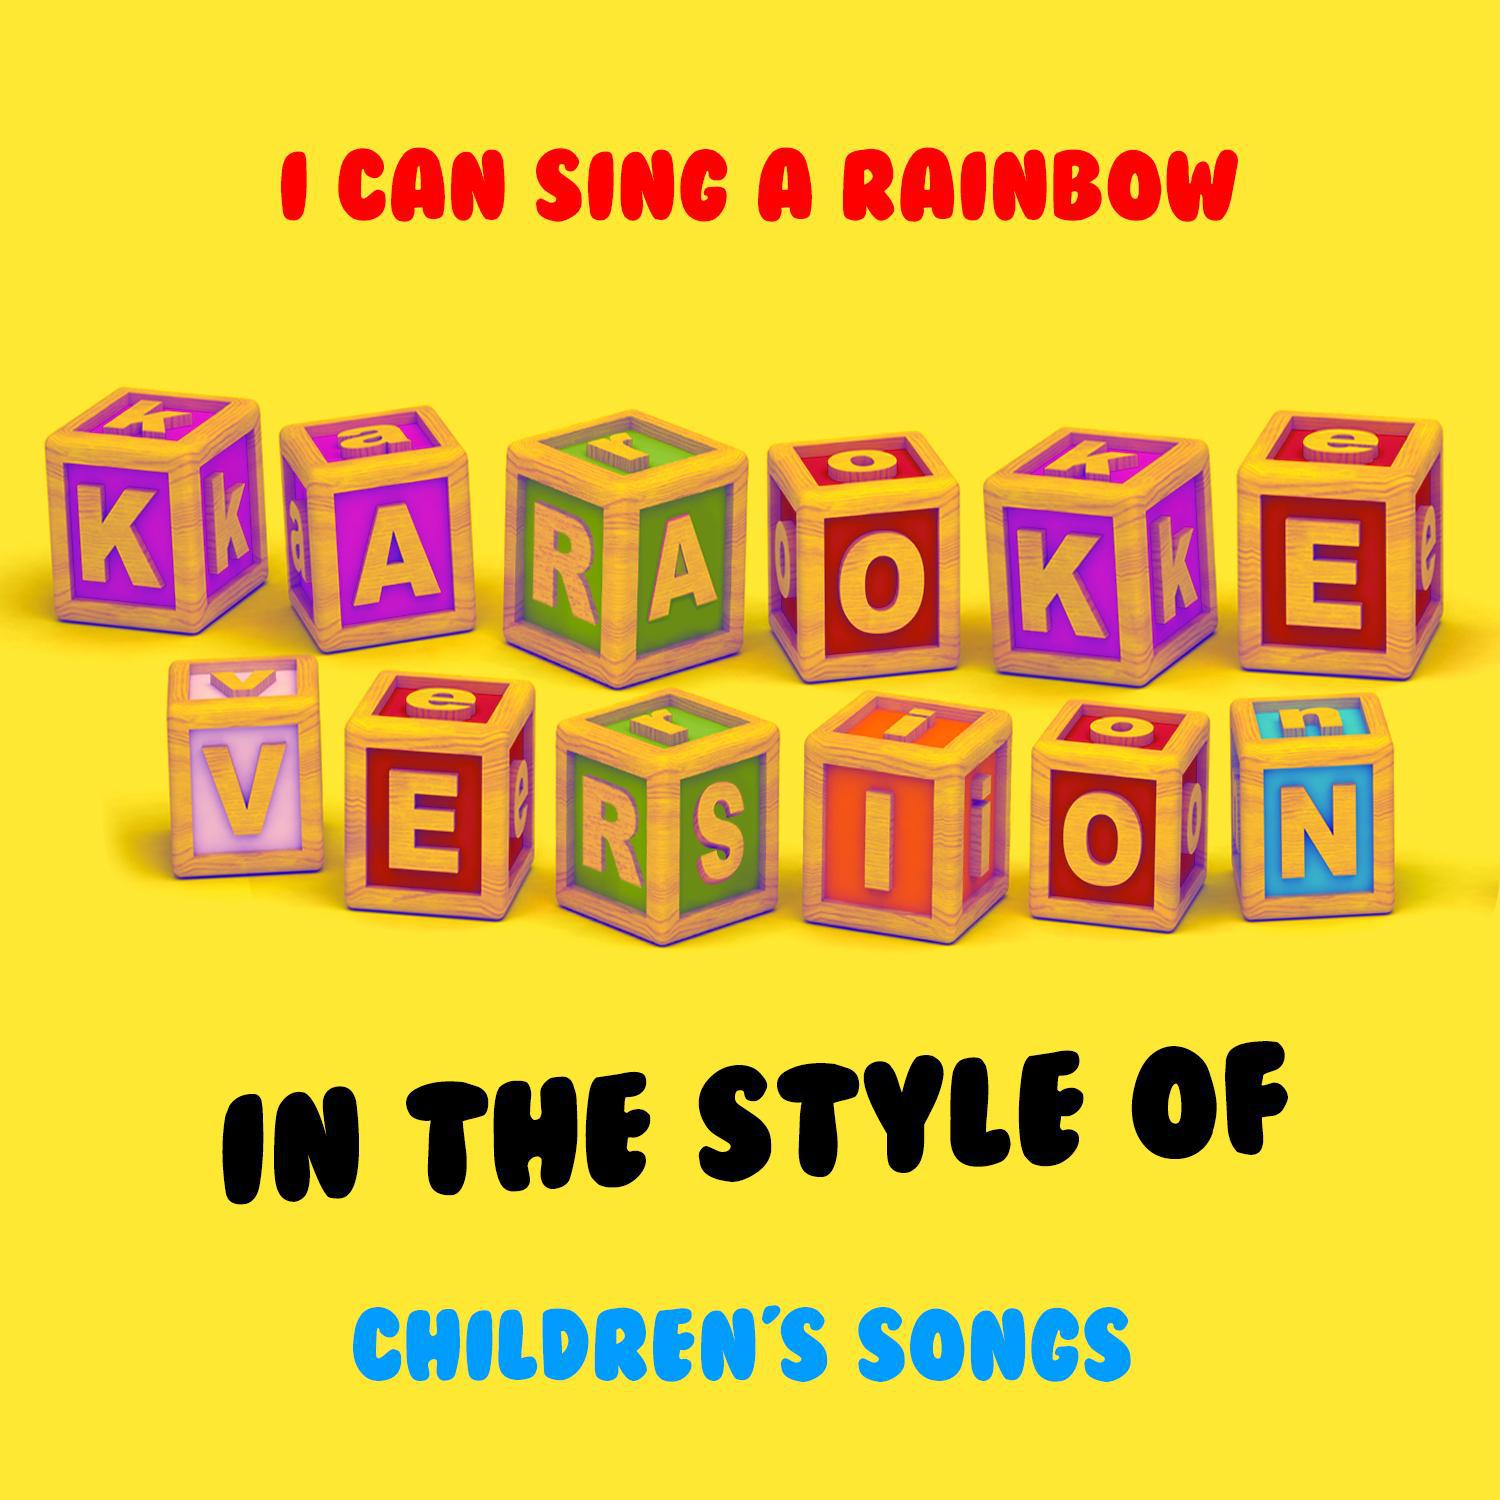 I Can Sing a Rainbow (In the Style of Childrens Songs) [Karaoke Version]